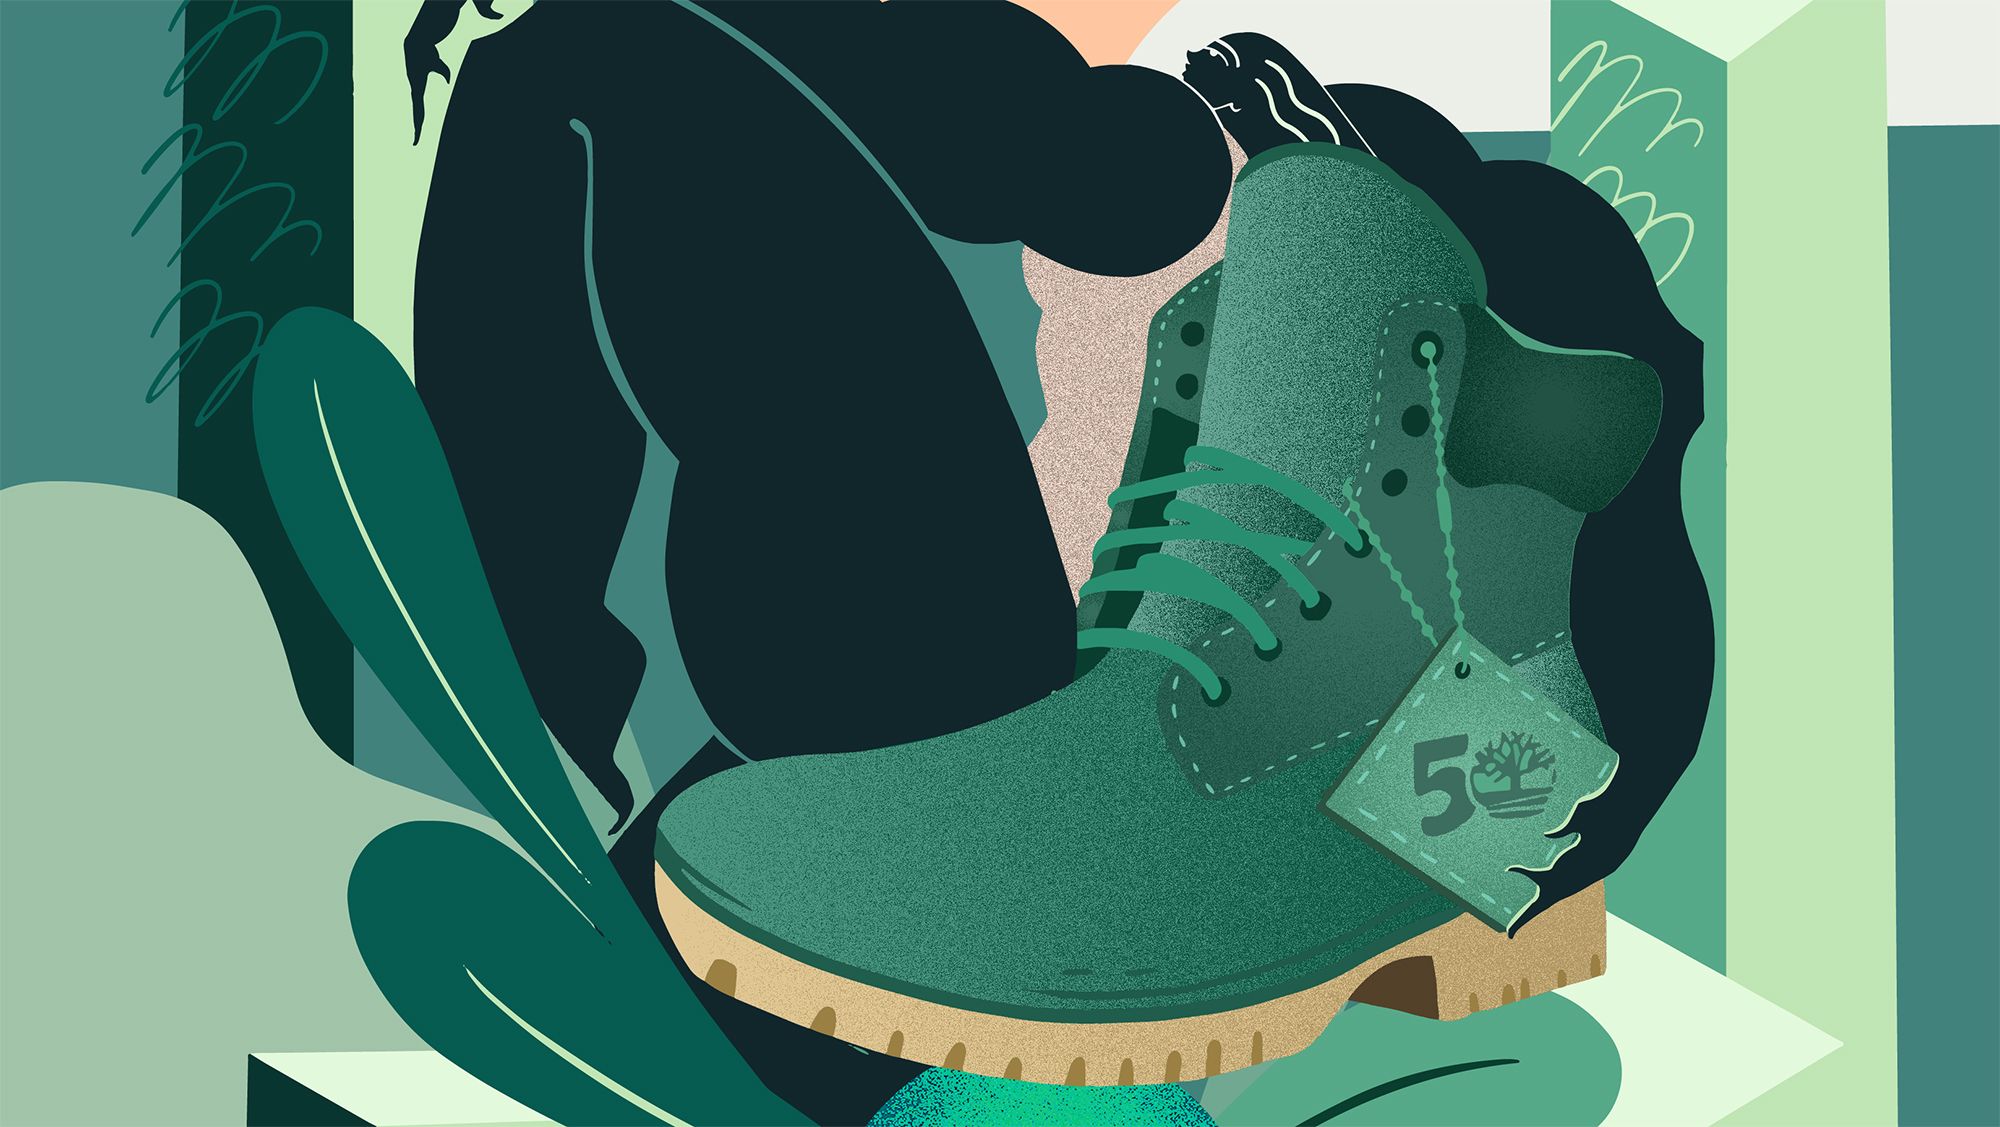 An illustration of a green boot with a tag on it.